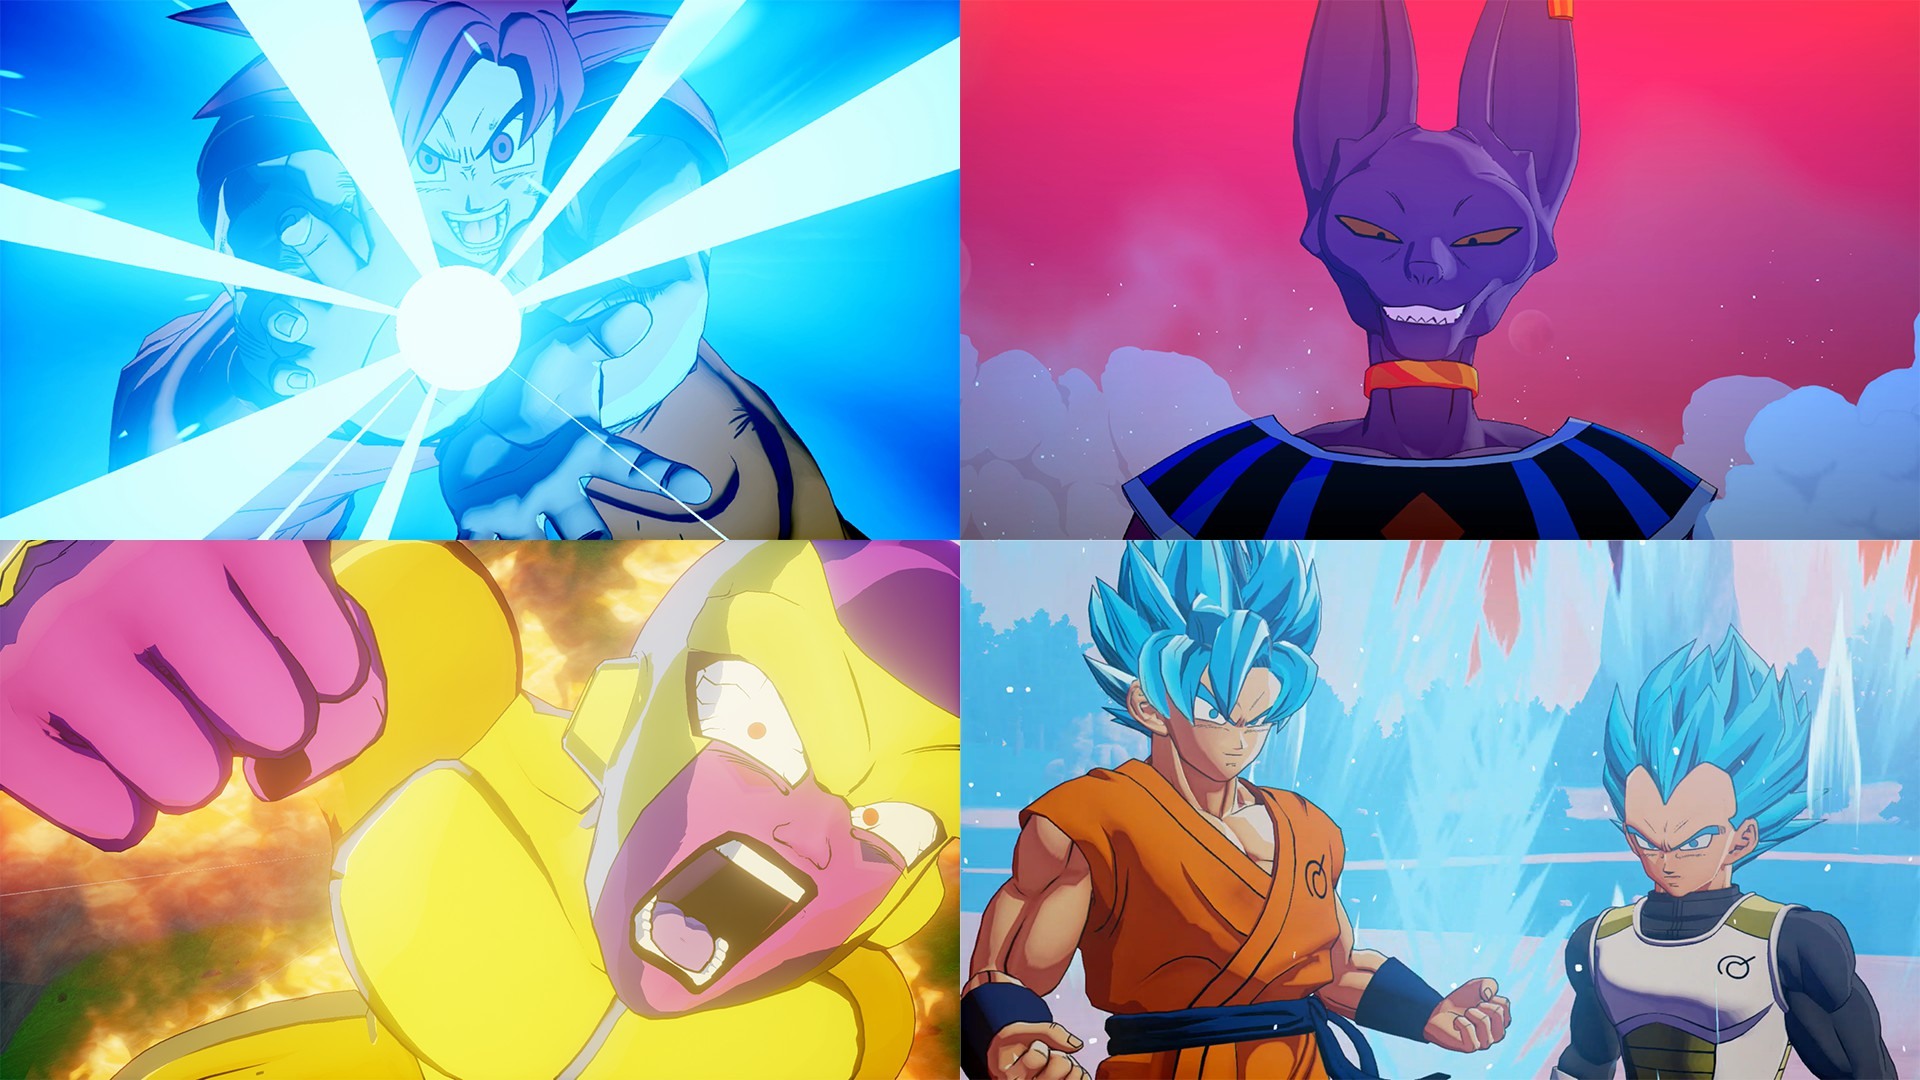 E3 21]&quot;Dragon Ball Z: Kakarot + A New Power Awakens&quot; will land on the Switch  platform in September to include additional chapter content &quot;Dragon Ball Z:  Kakarot + A New Power Awakens&quot; - Newsdir3